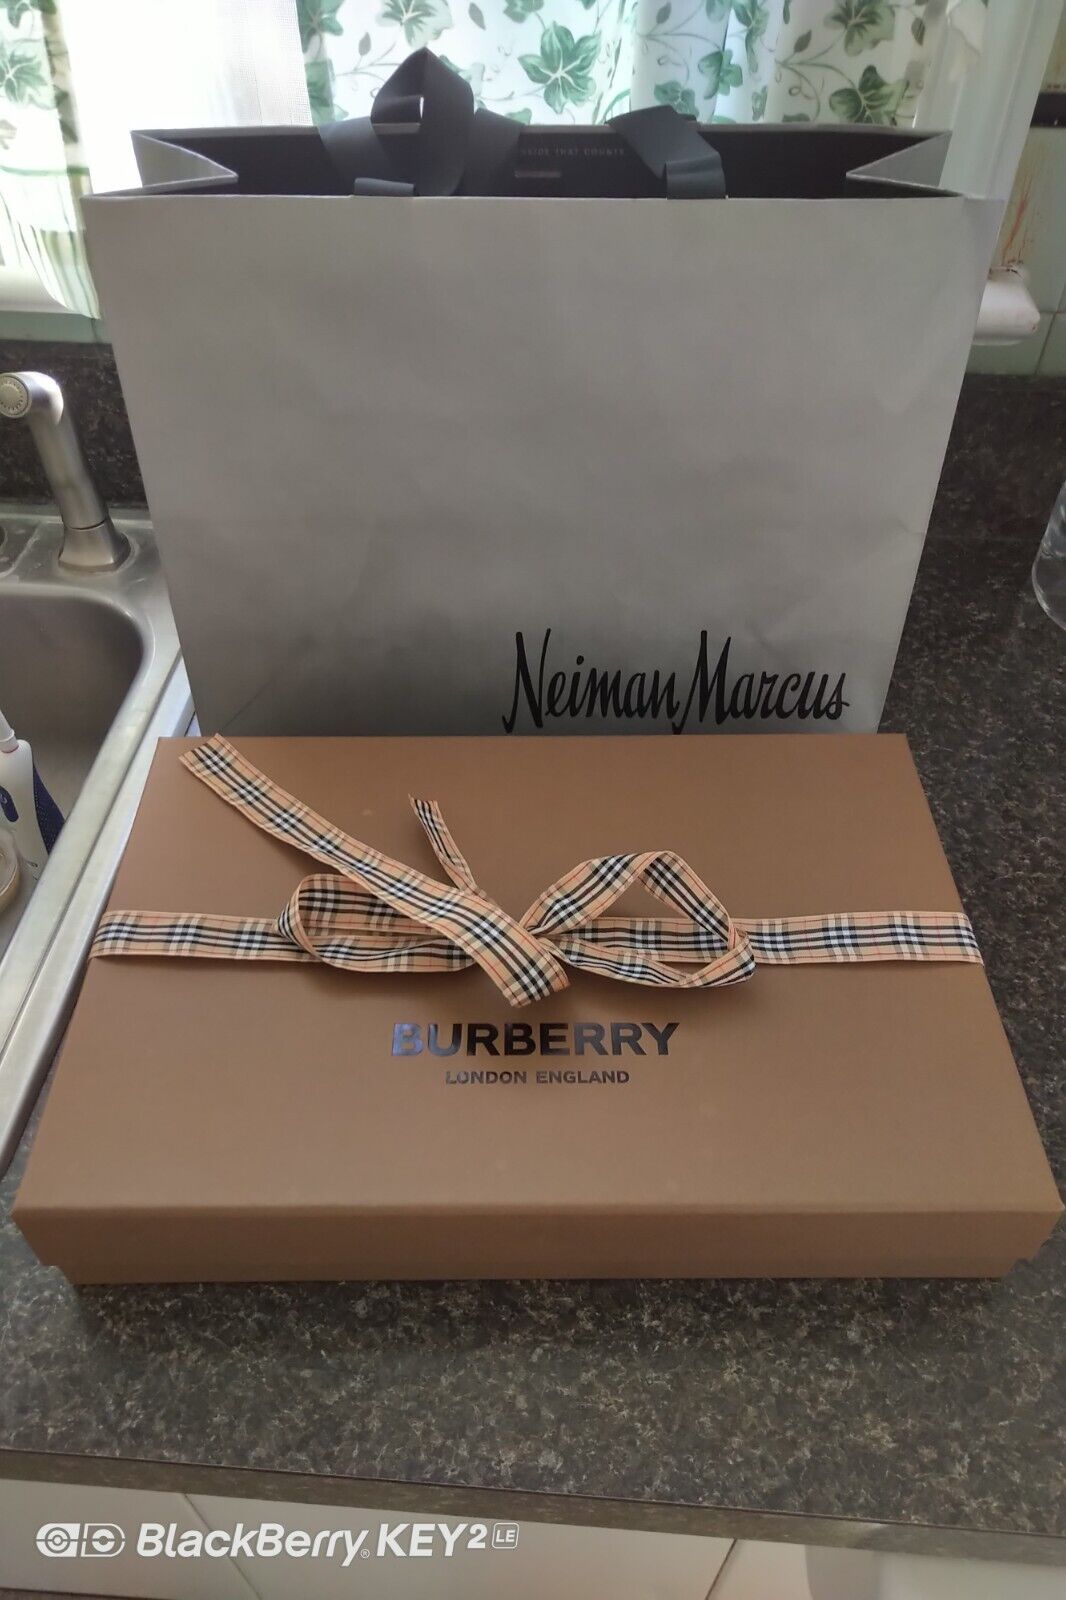 Neiman Marcus NWT'S Burberry XS-S Dog Set Onsie and Blanket Ret. $799 + tax